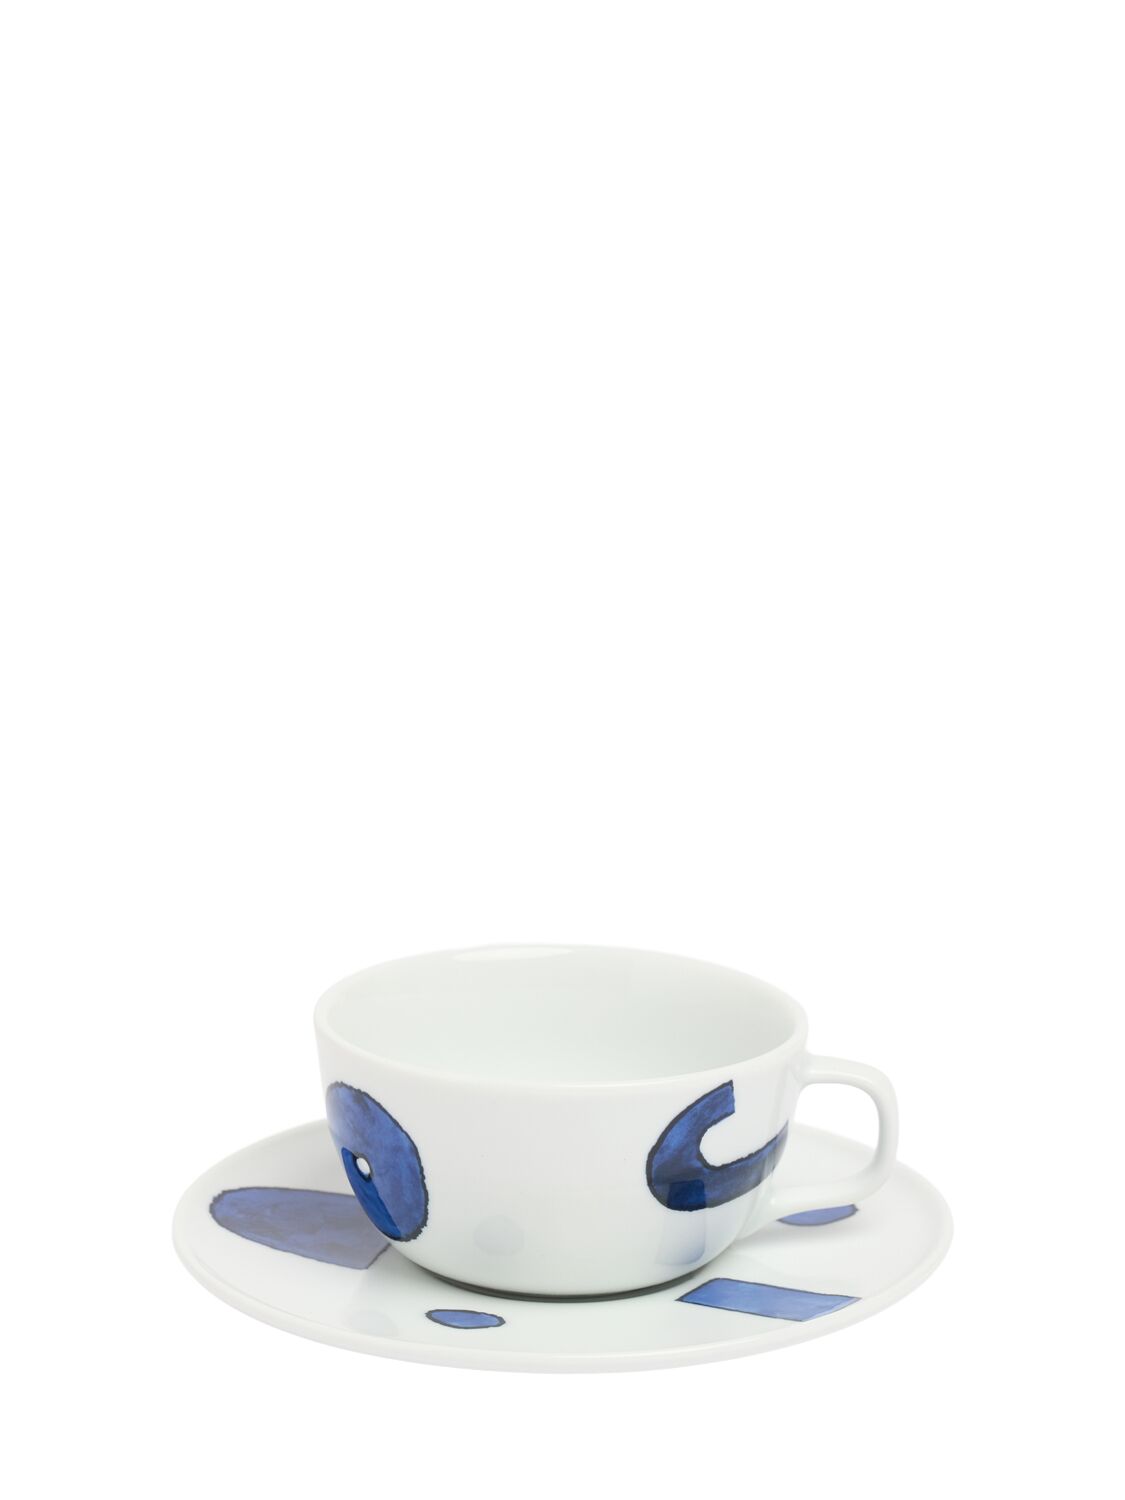 Alessi Set Of 4 Itsumo Teacups & Saucers In White,blue